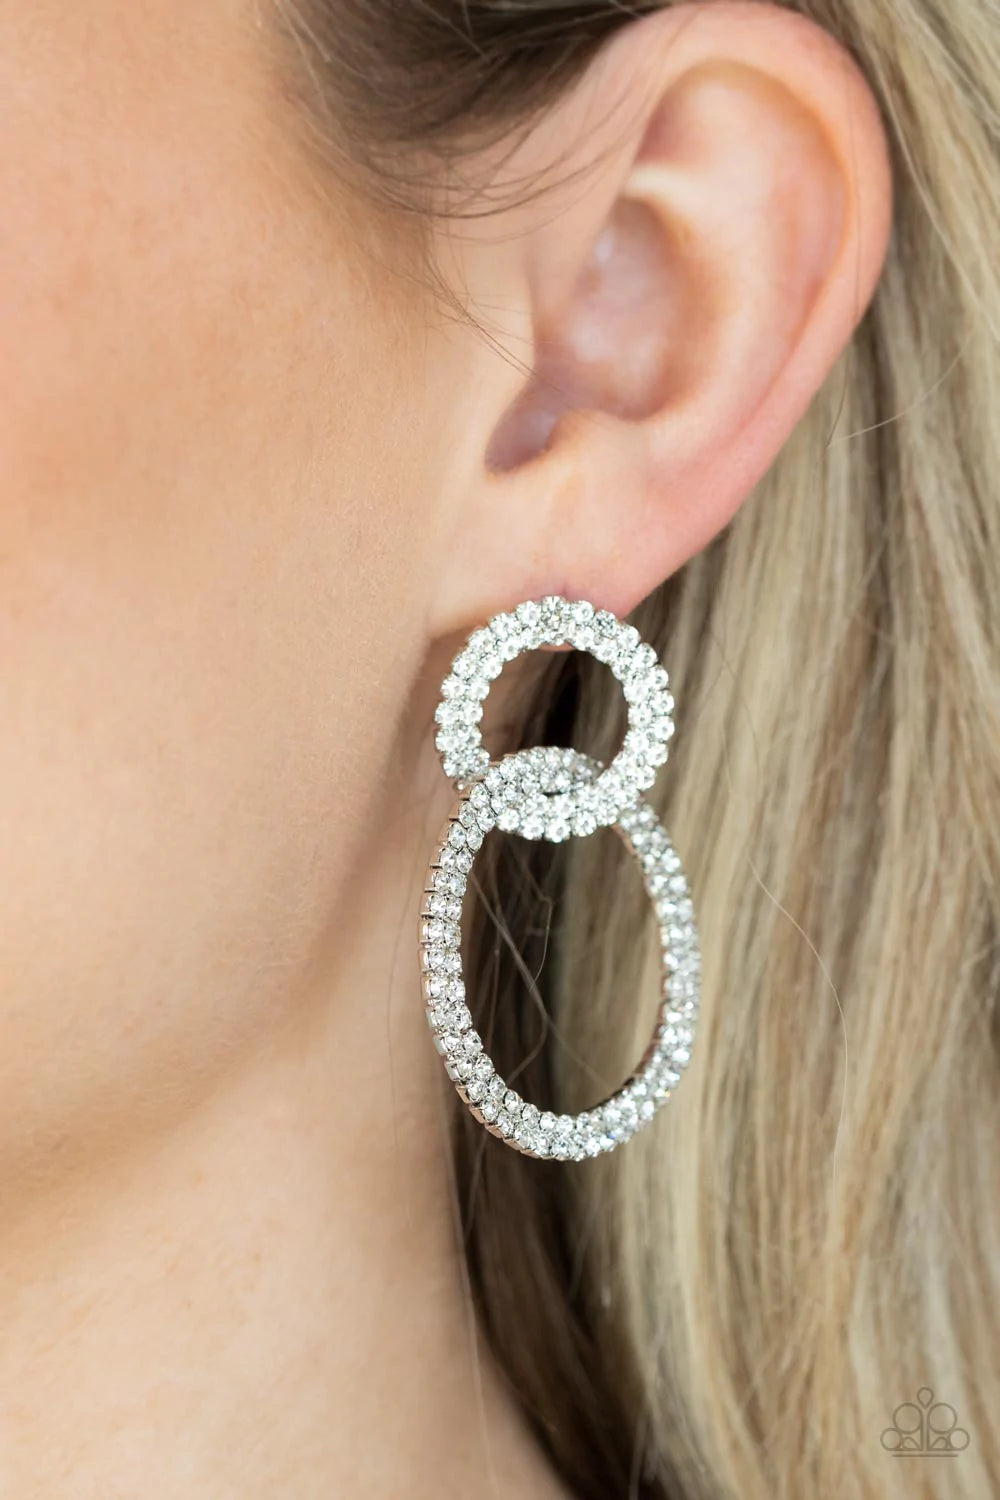 Paparazzi Accessories Intensely Icy - White Rows of sparkly white rhinestones encircle into two interconnected hoops, creating a jaw-dropping lure. Earring attaches to a standard post fitting. Sold as one pair of post earrings.